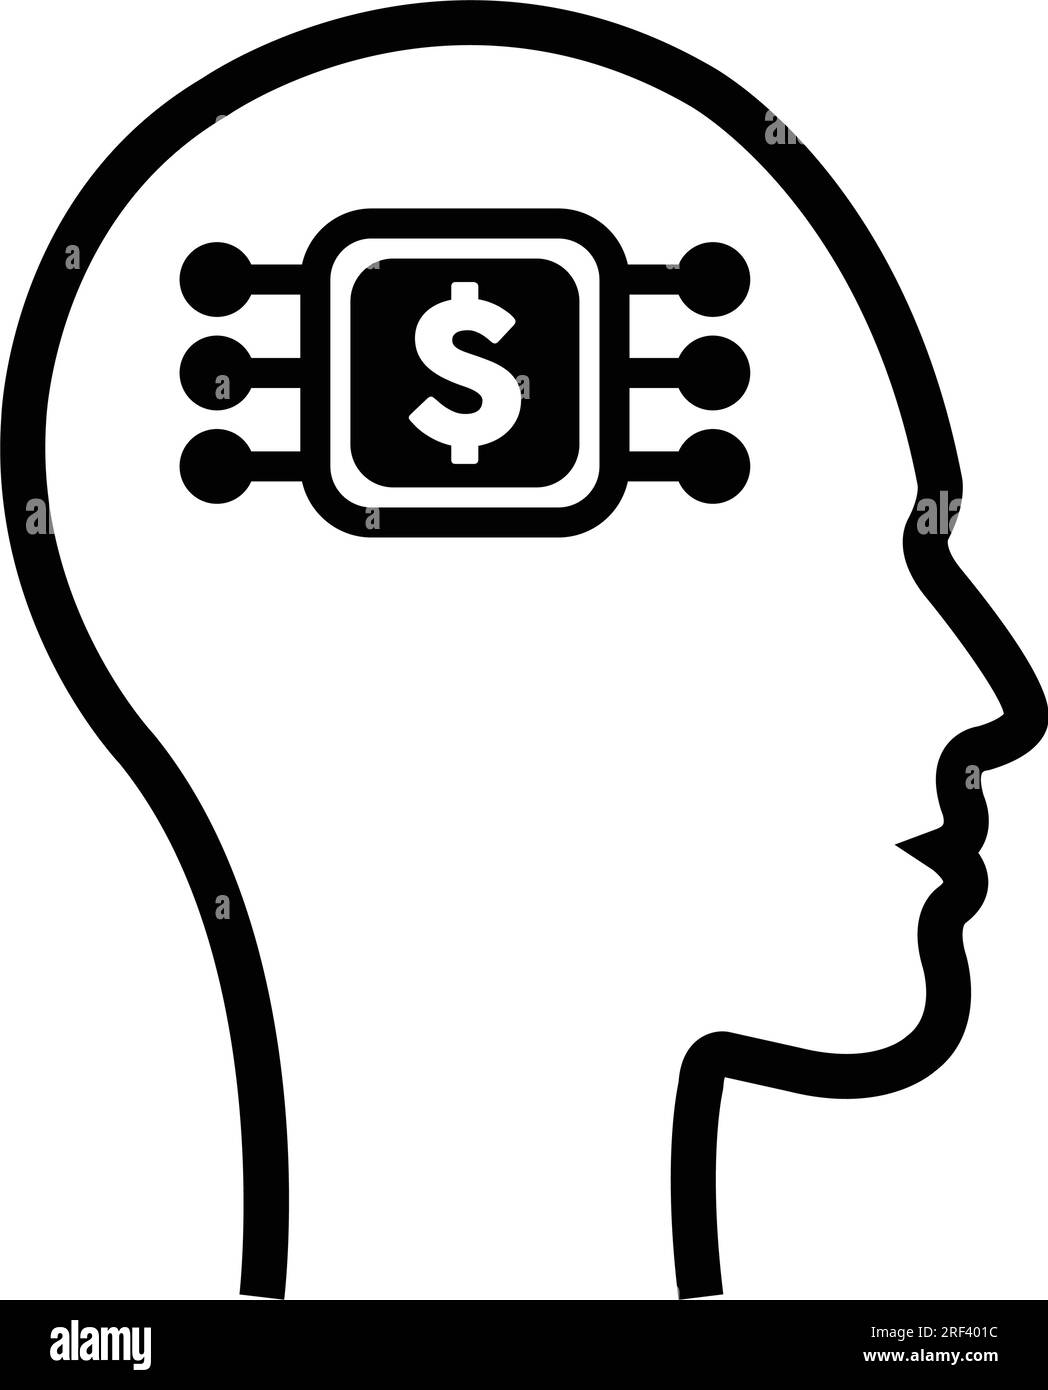 An AI artificial intelligence design for finance and money mind illustration depicted as a digital dollar sign on a futuristic human profile face impl Stock Vector